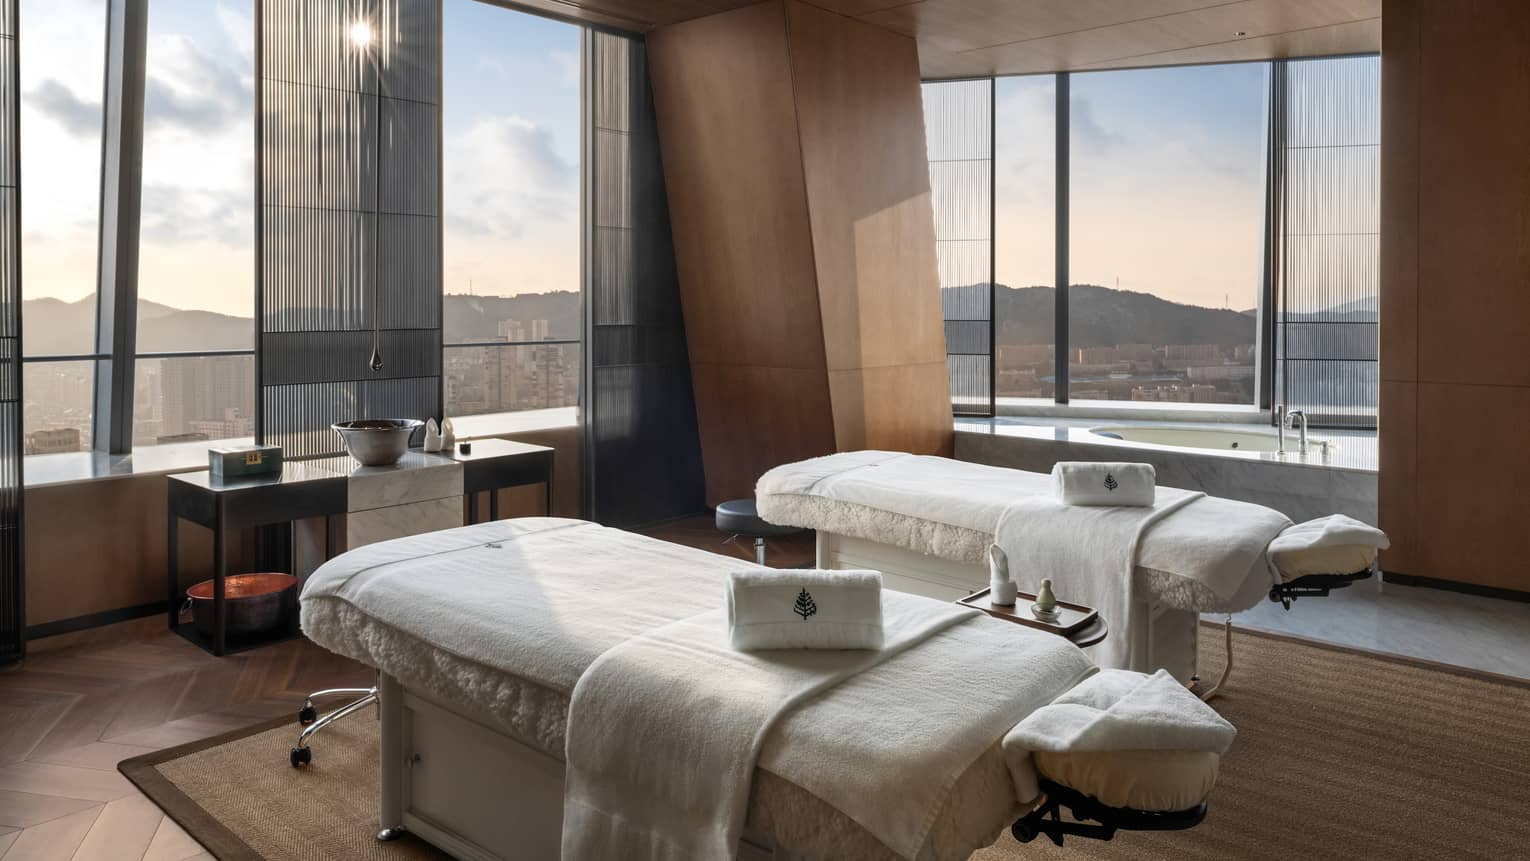 Spa treatment room with two treatment beds and expansive views of Dalian, China